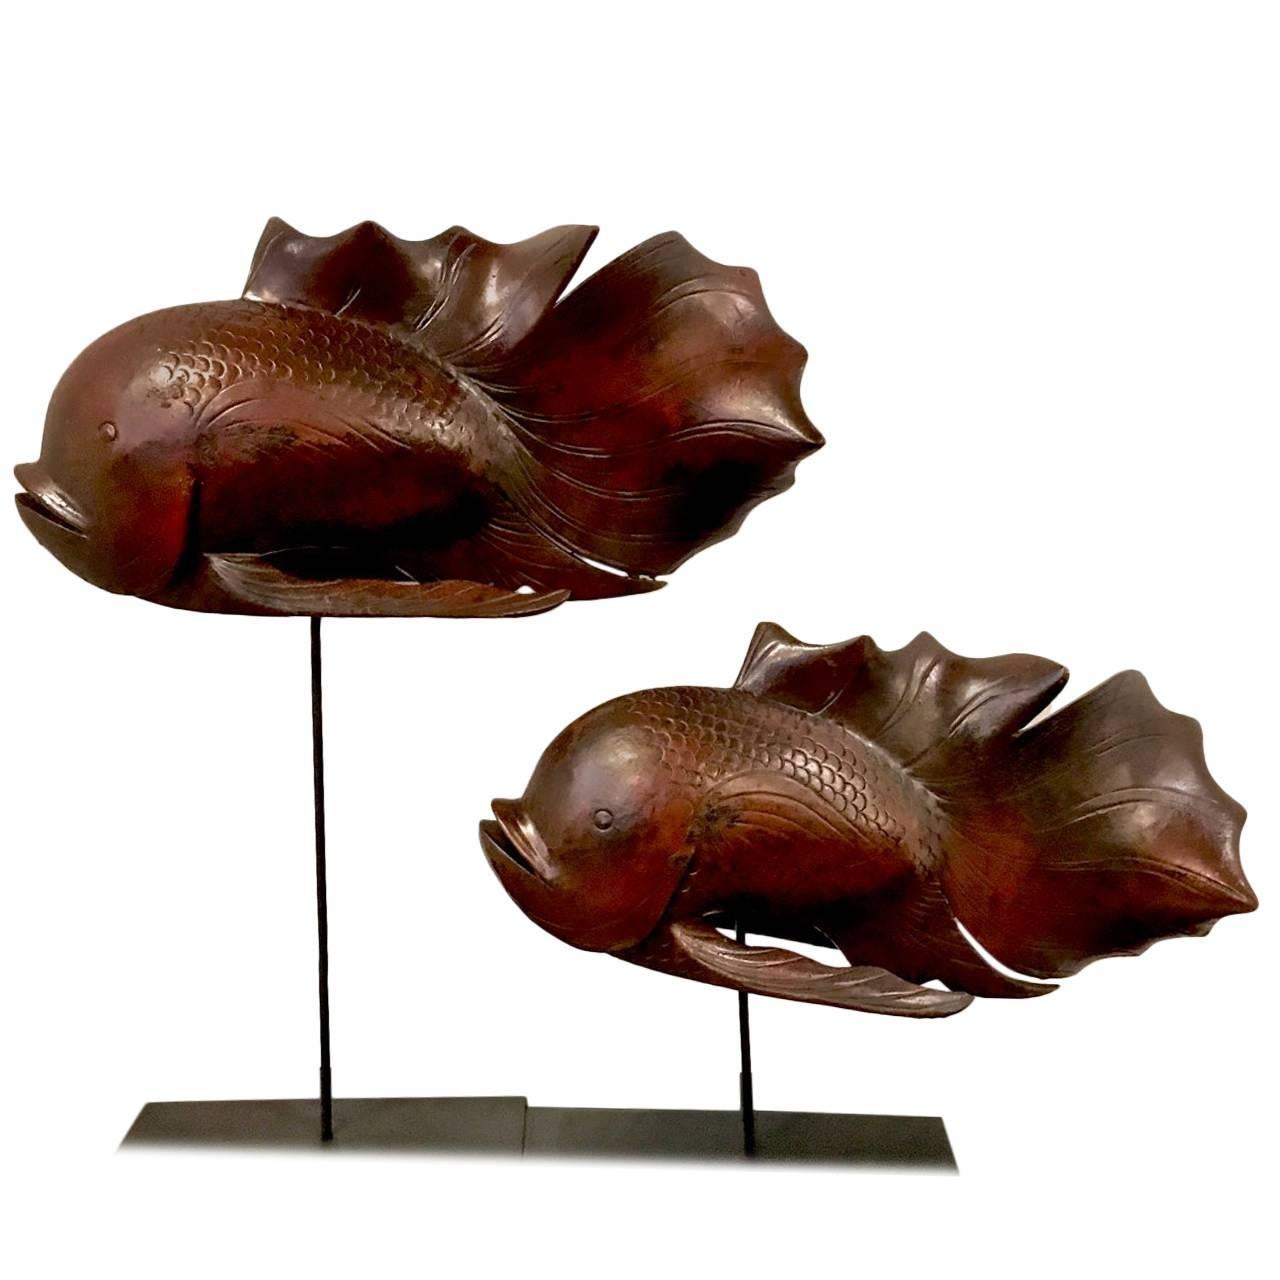 Pair of Japanese Carved Rosewood Koi Sculptures on Stands